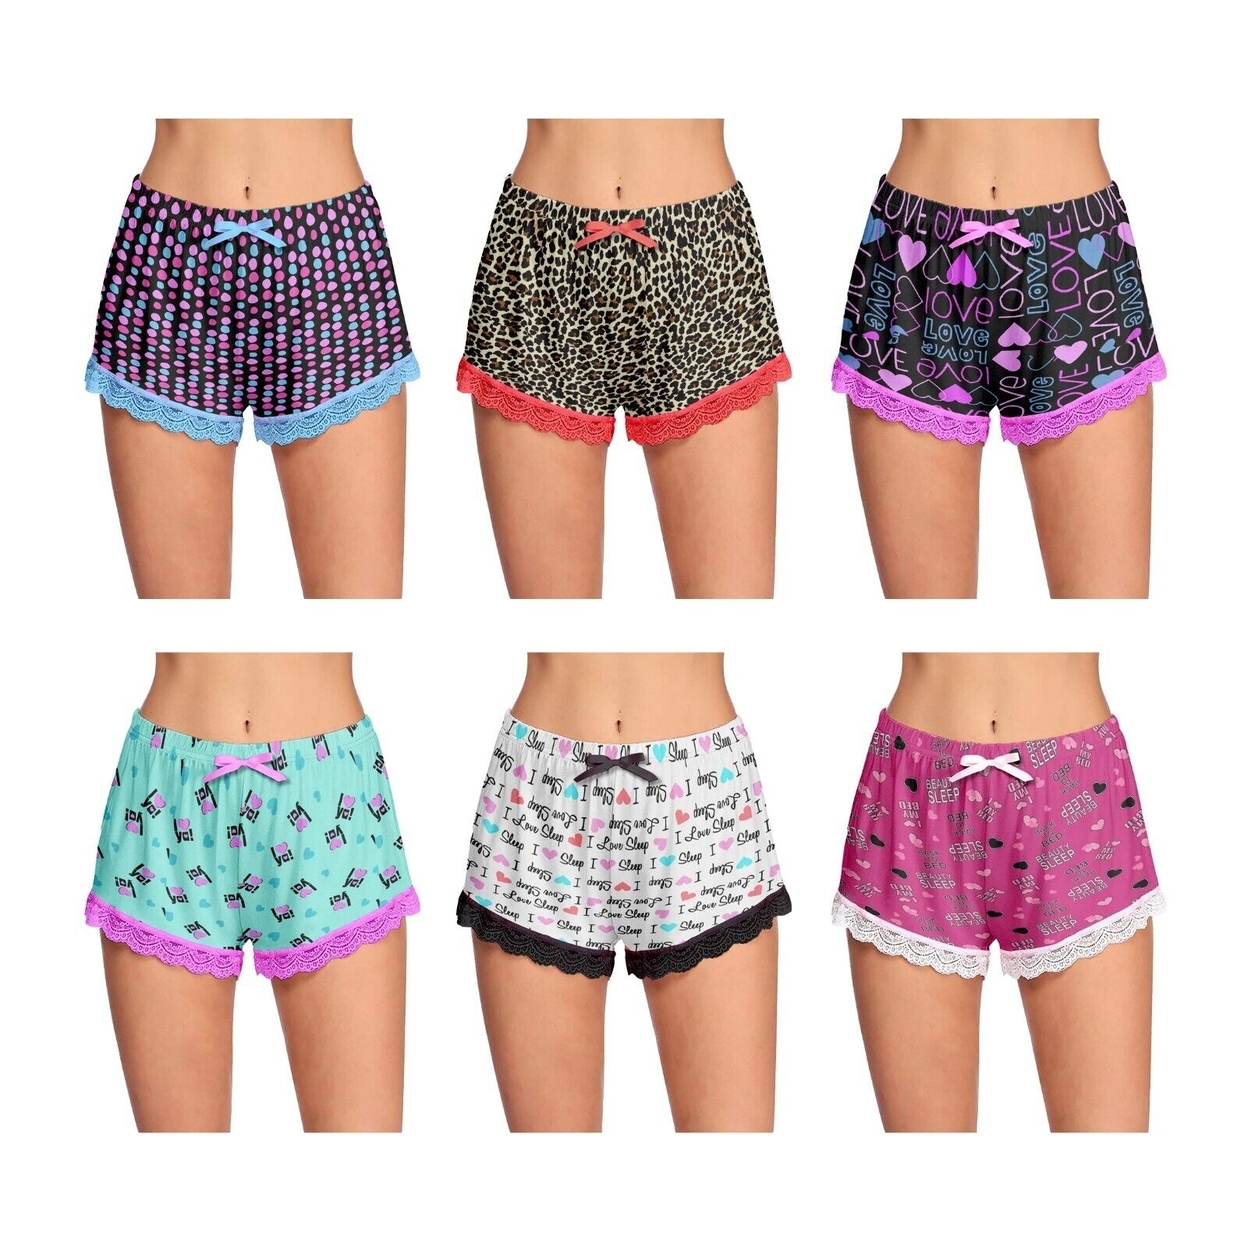 Multi-Pack: Women's Ultra-Soft Cozy Fun Printed Lace Trim Pajama Lounge Shorts - 2-pack, Large, Love